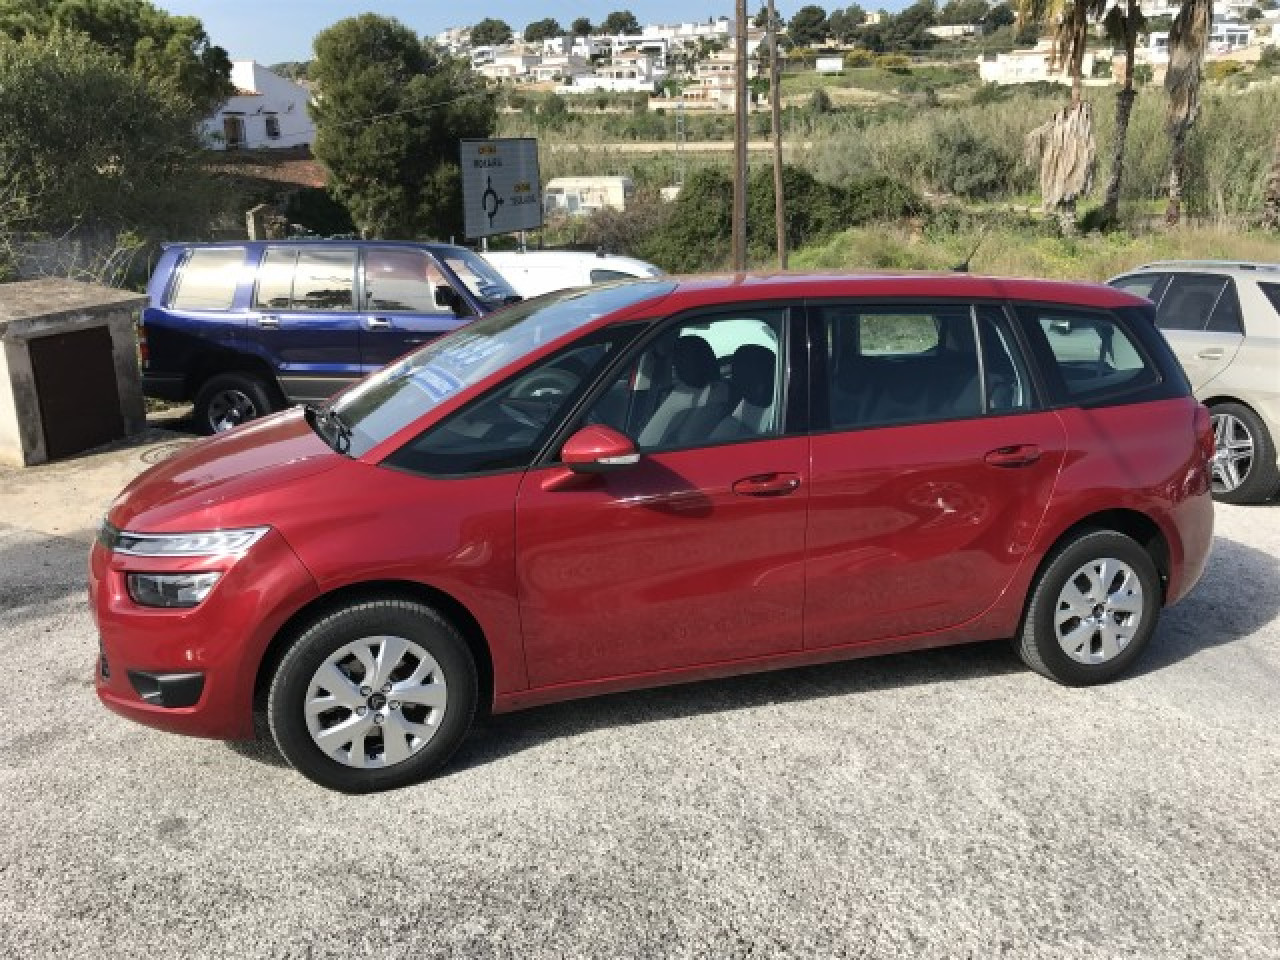 Citroen Grand C4 Picasso 1.6 E Hdi Automatic People carrier